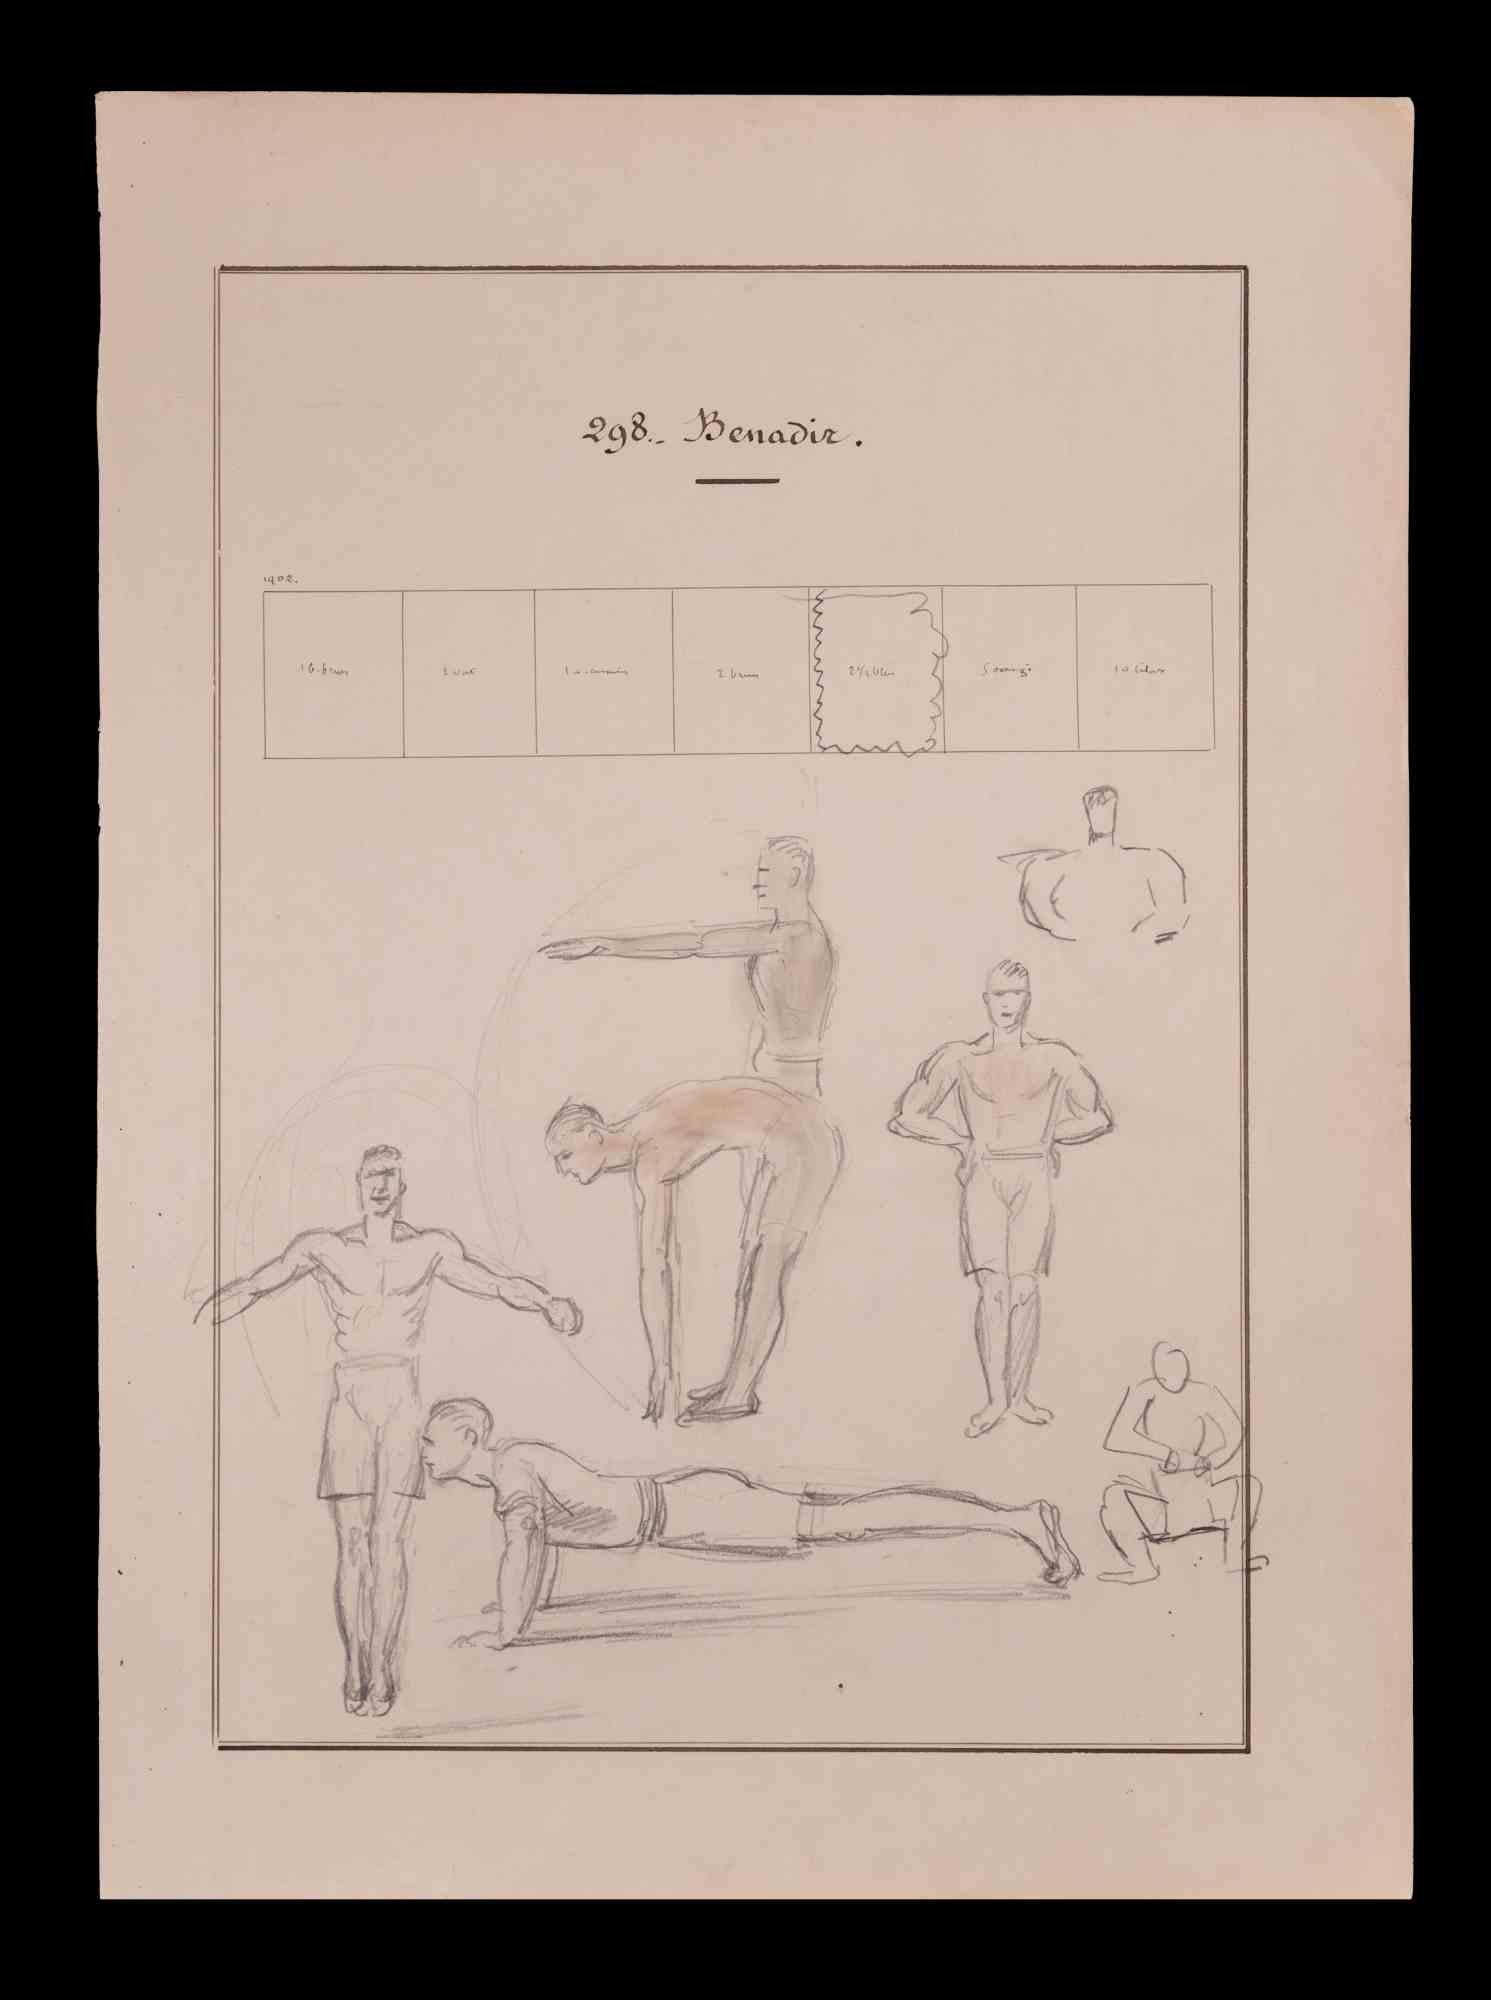 Exercise is an original drawing in pencil, on creamy-colored paper realized by Norbert Meyre in the early 20th Century.

Good conditions.

The artwork is depicted through deft strokes by mastery.
